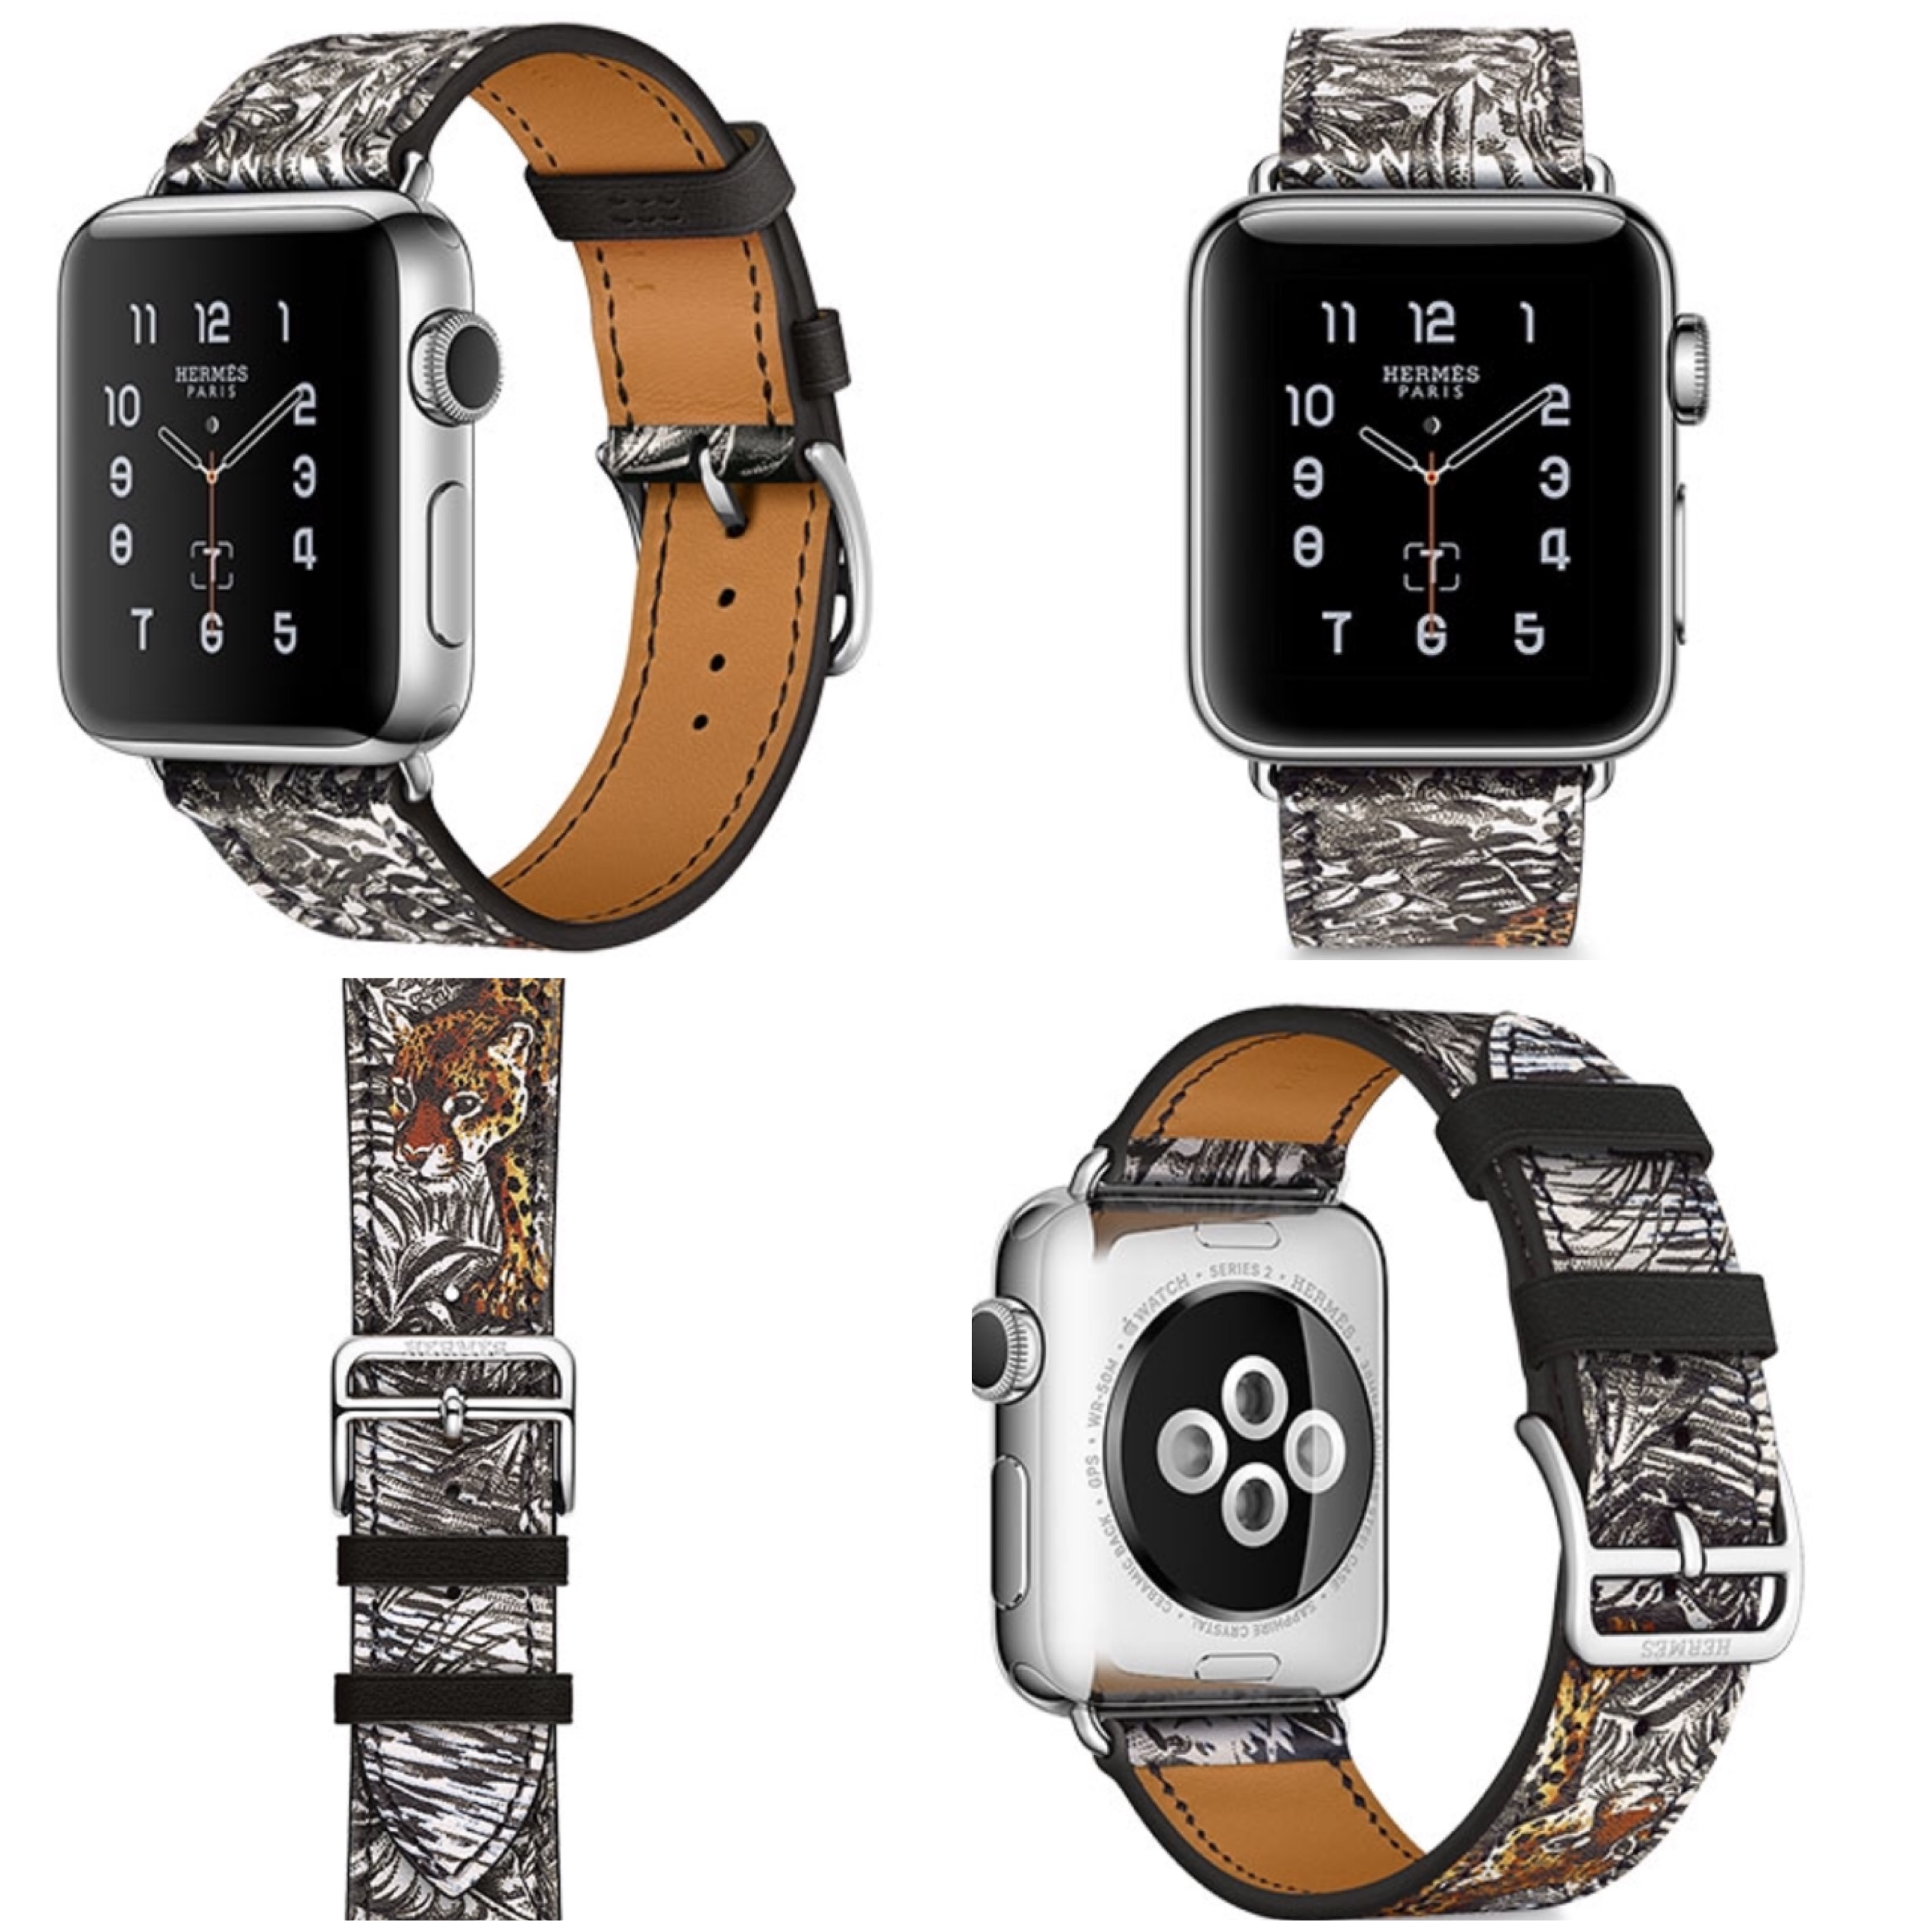 New Hermès Apple Watch Band Just Released